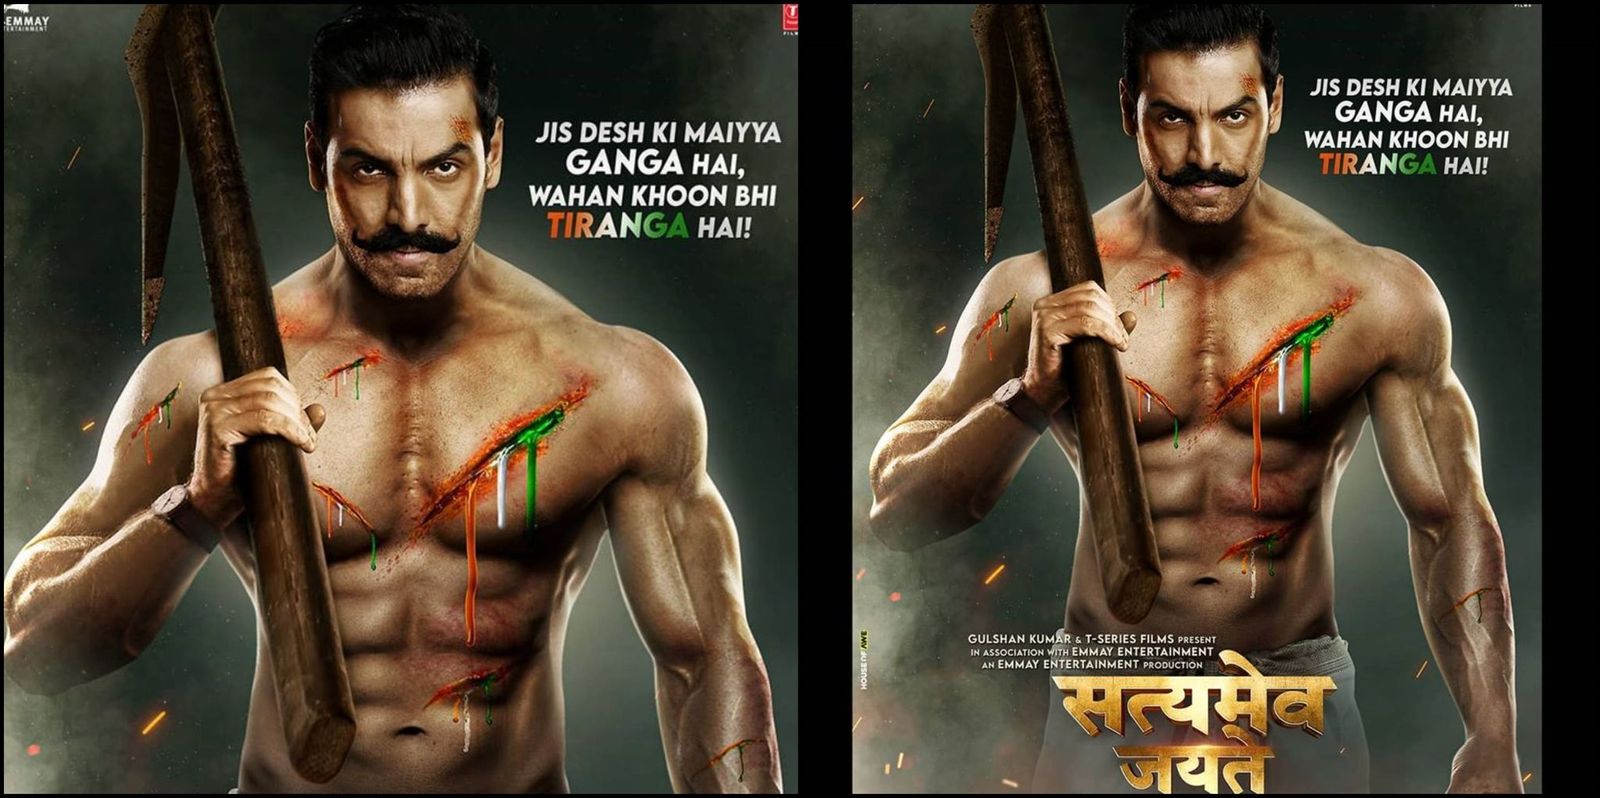 John Abraham’s Satyameva Jayate 2 To Release On Eid Next Year; Actor Unveils A Glorious New Poster